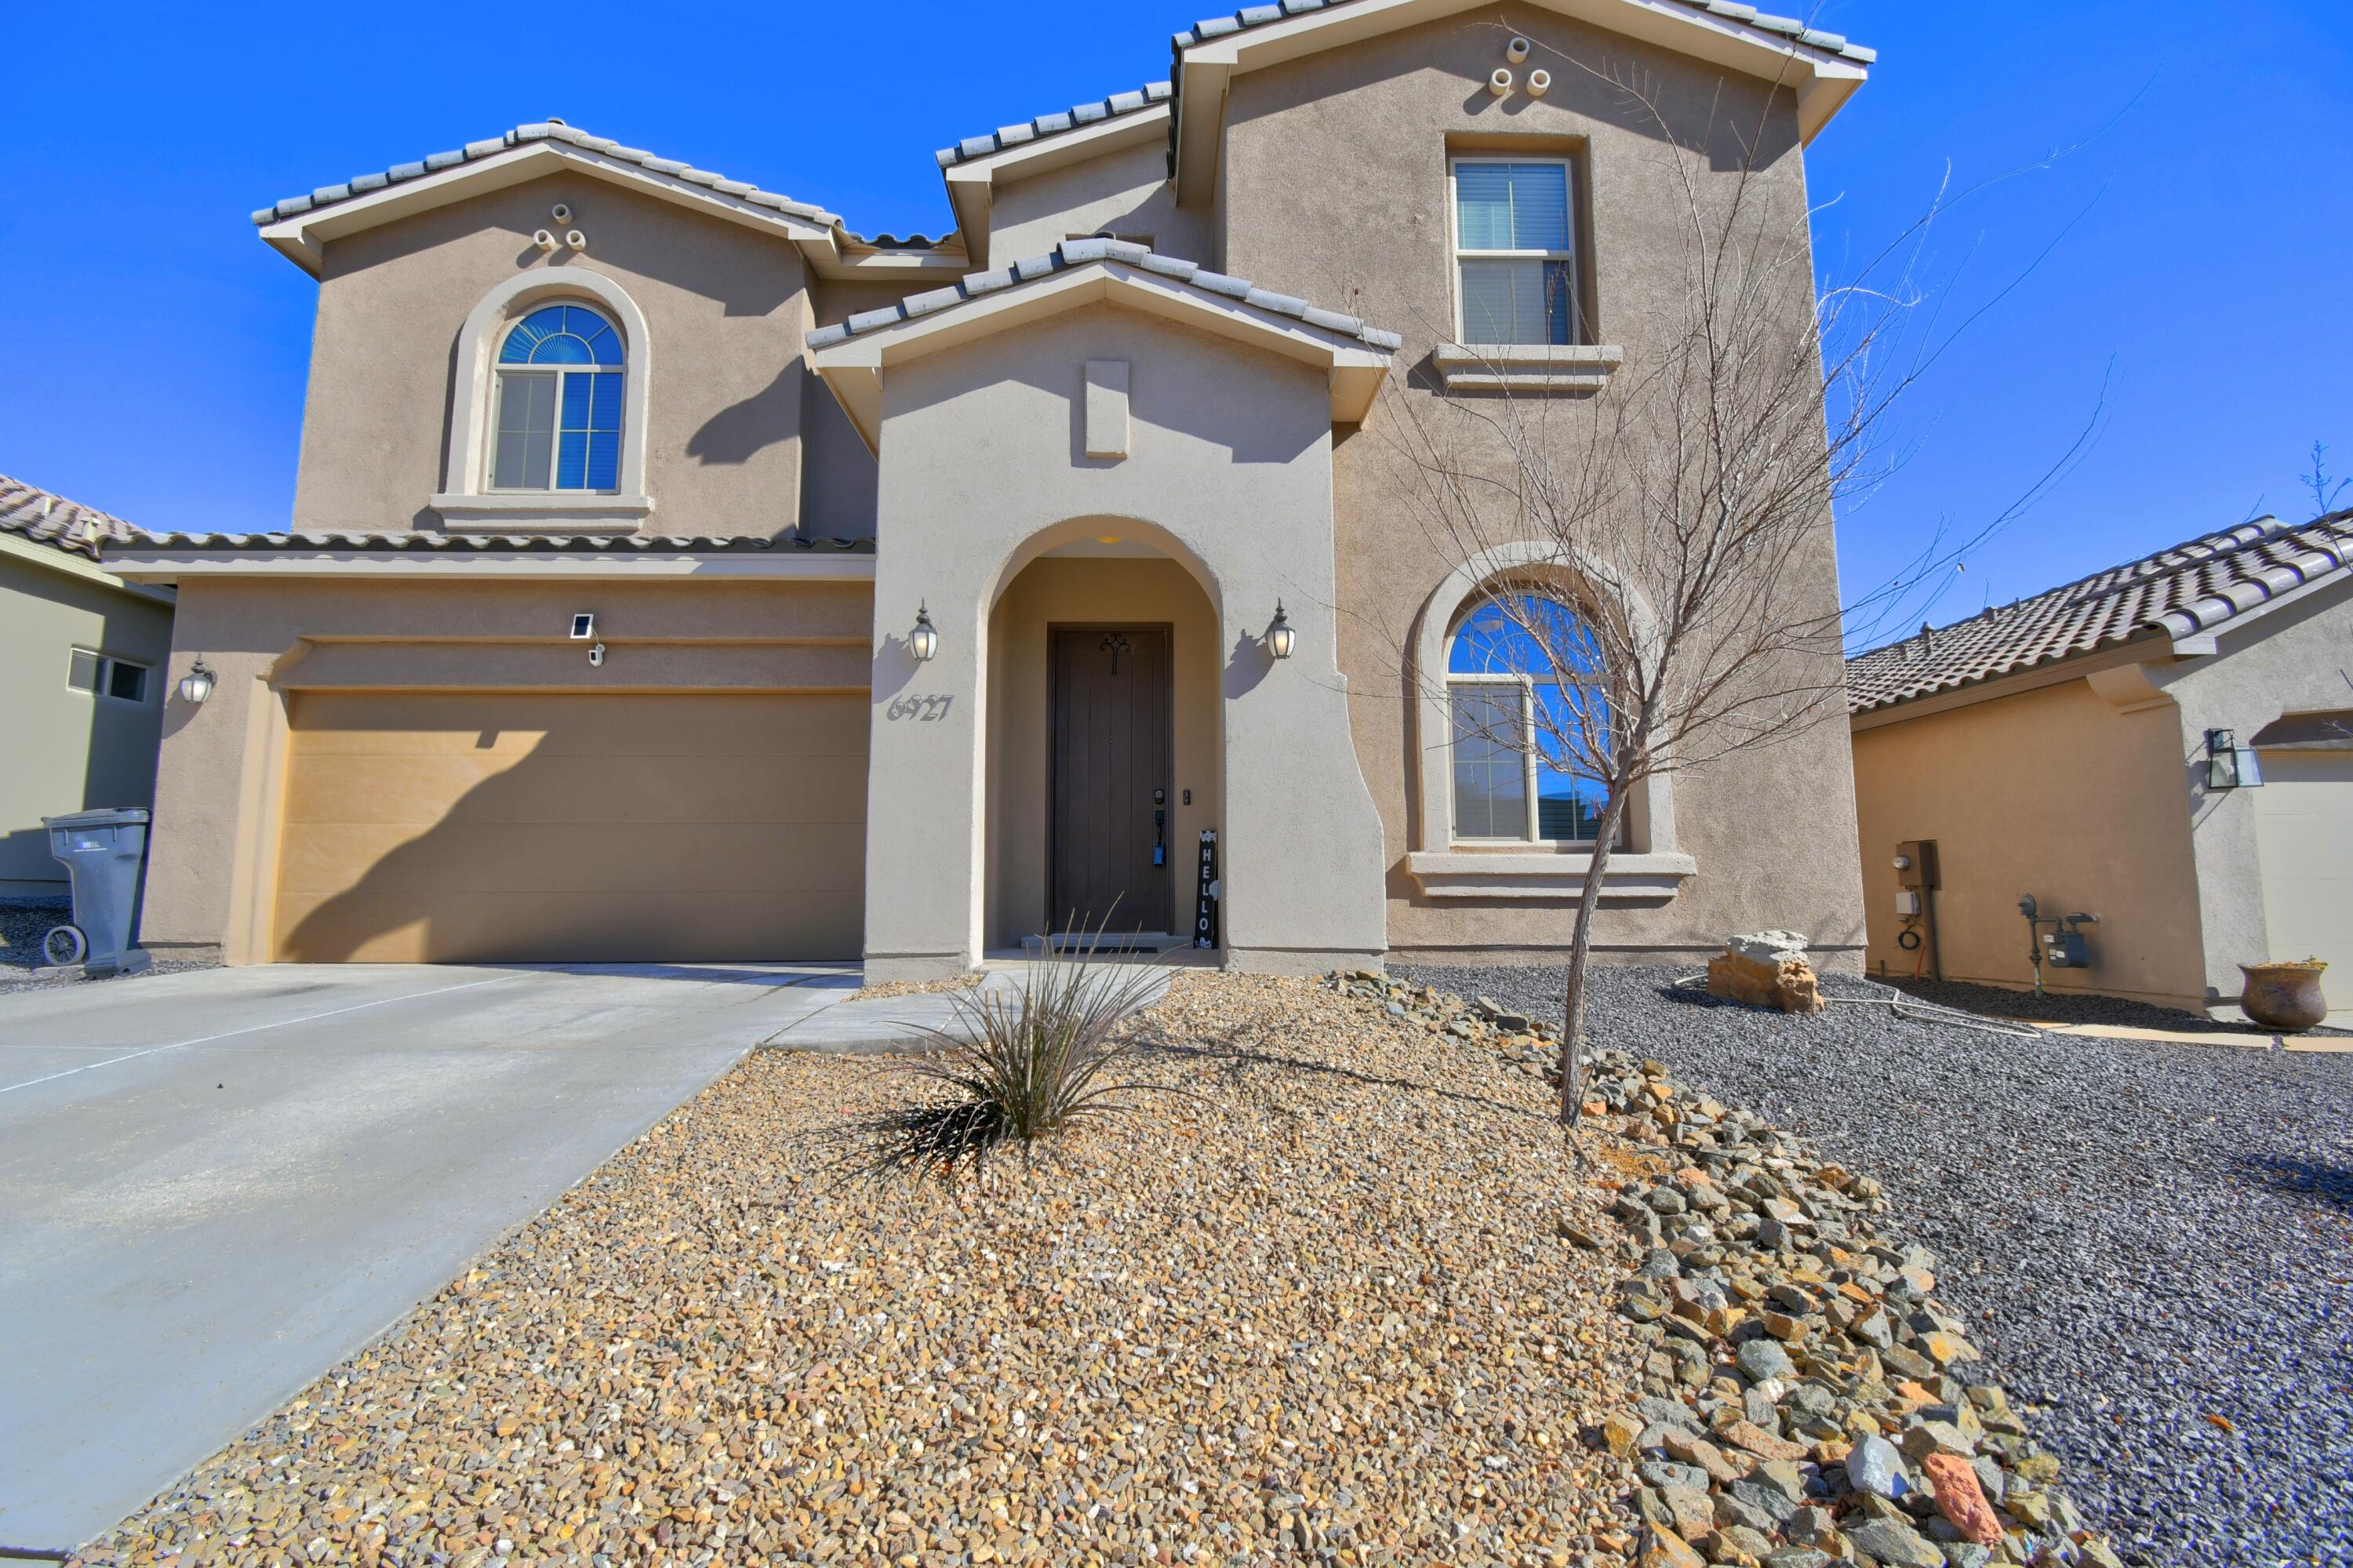 5BR beauty in Lomas Encantadas! No PID! ION Solar Included! Newer Blinds! Contemporary Pendant Lights! Recent Window Tint! $15k in New Landscaping!